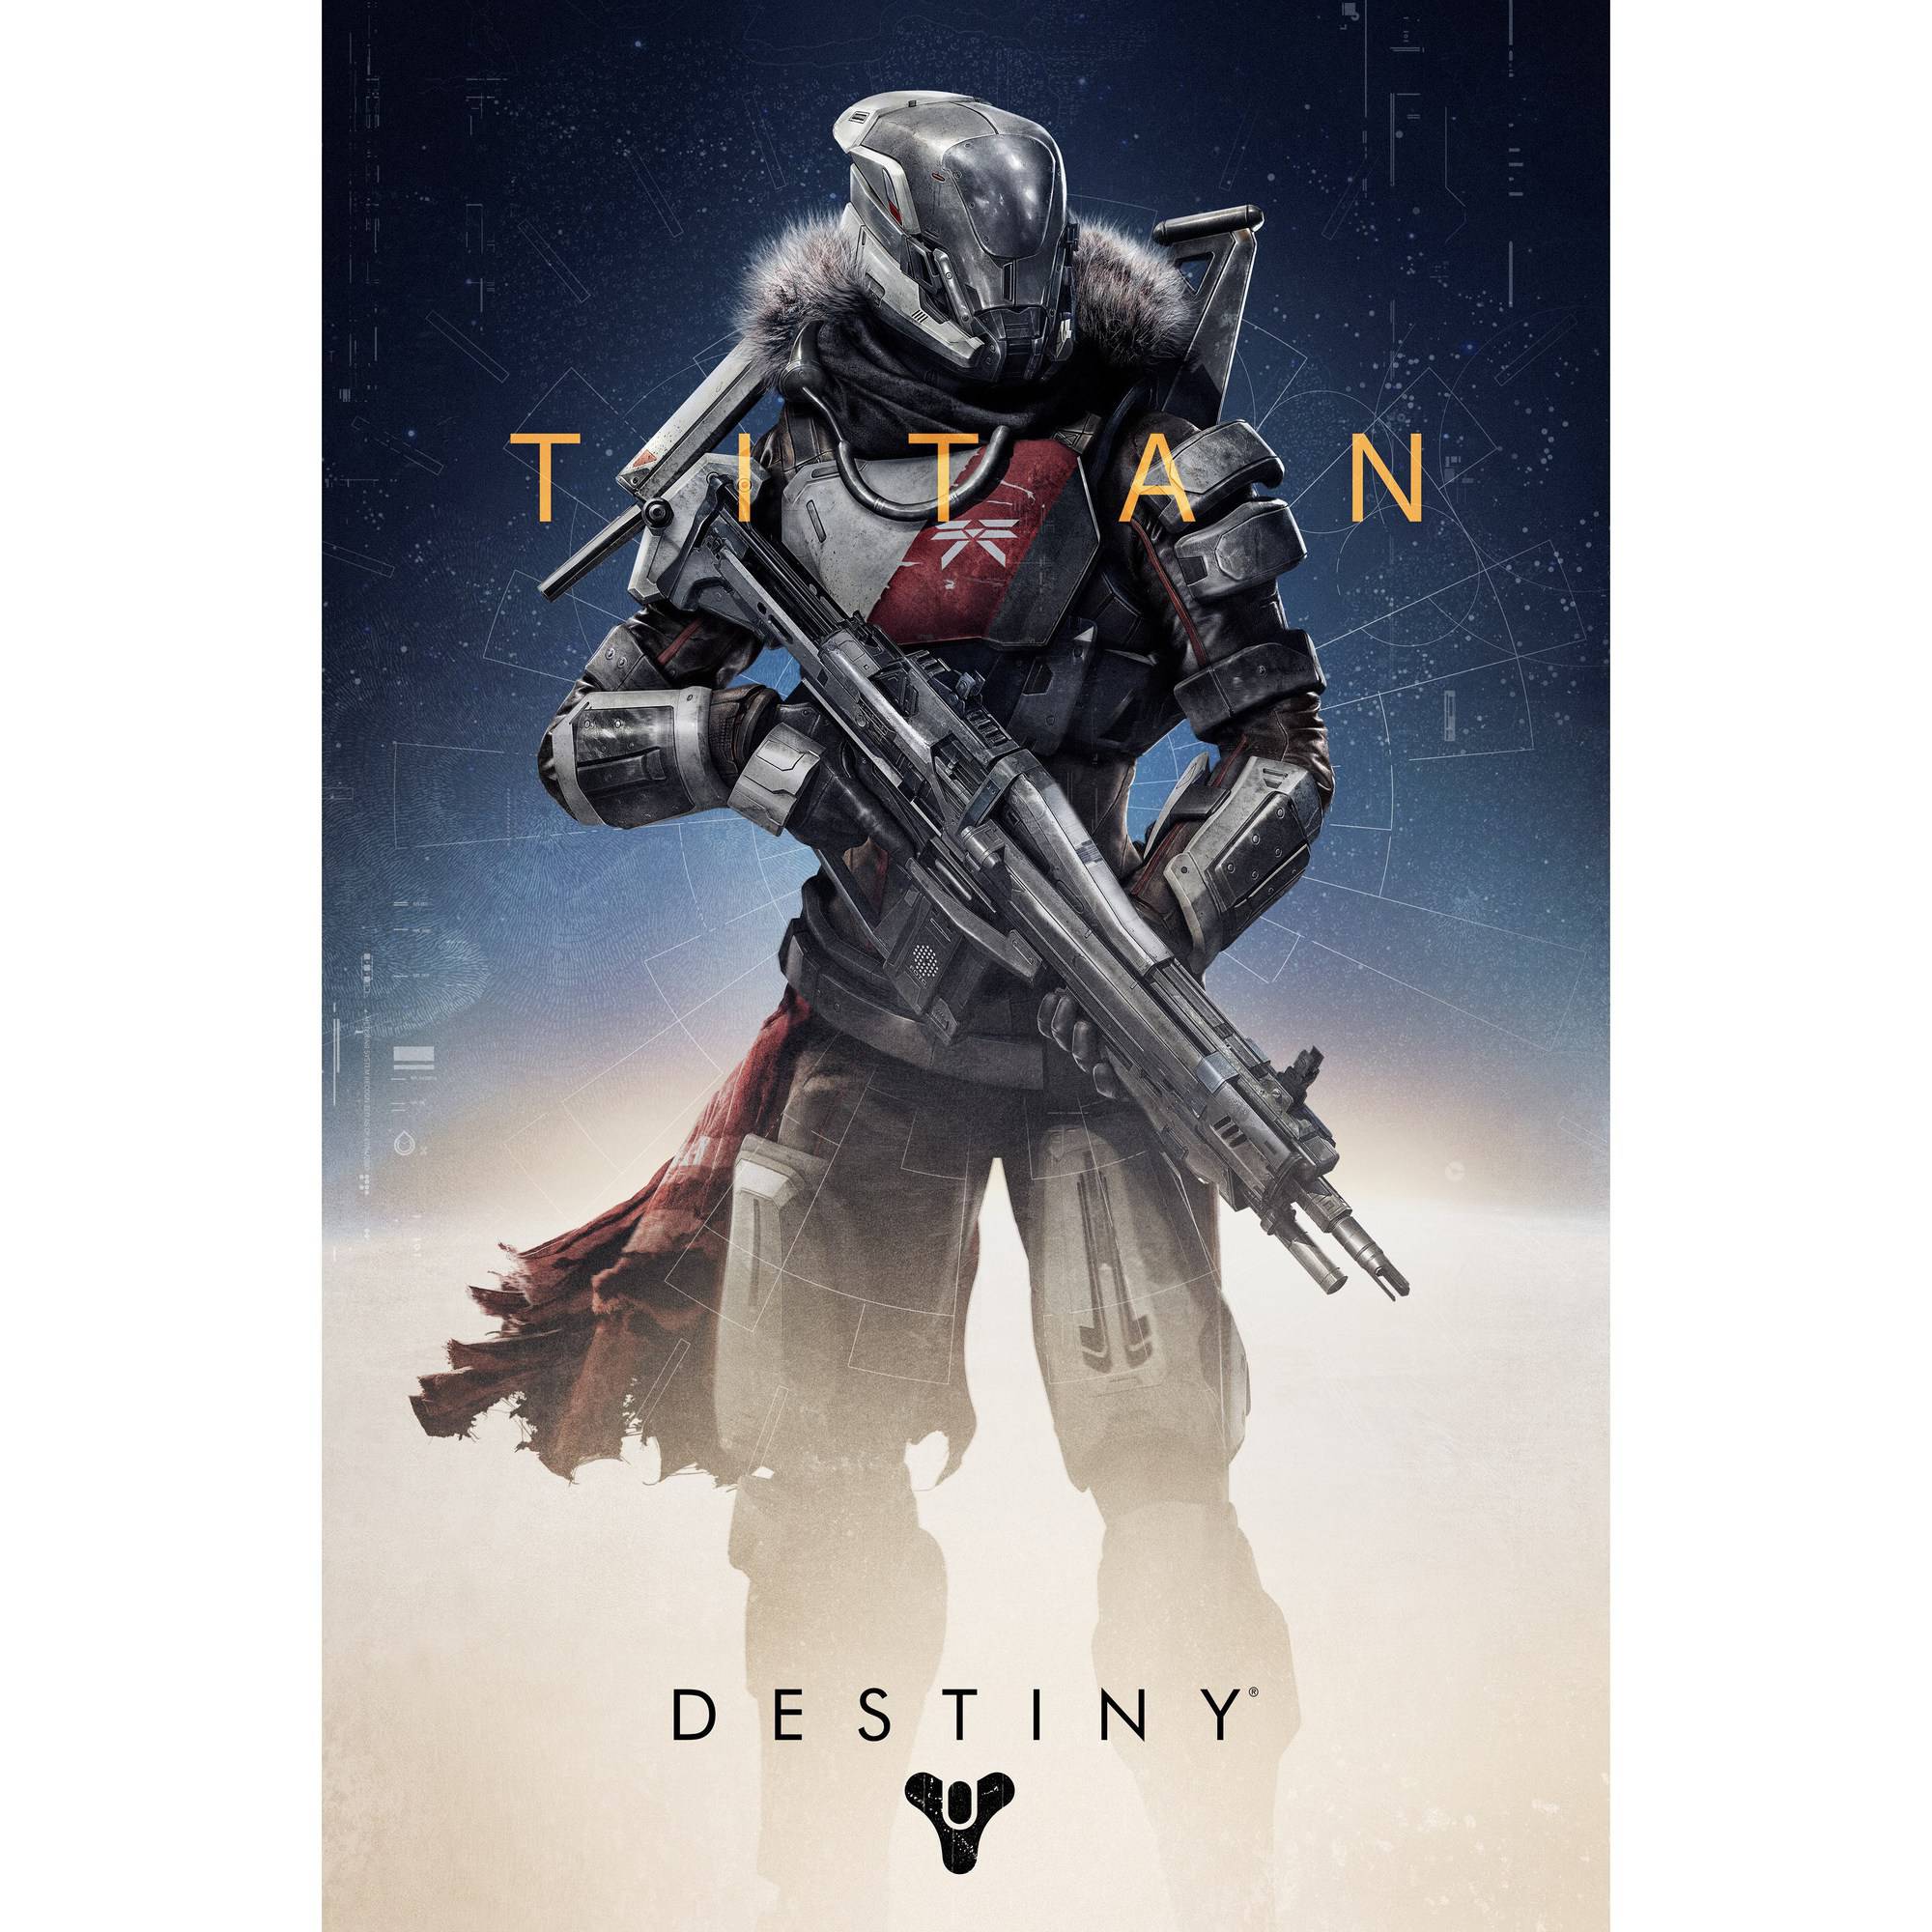 Destiny: The Taken King Legendary Edition, Activision, PlayStation 4, 047875874428 - image 22 of 31